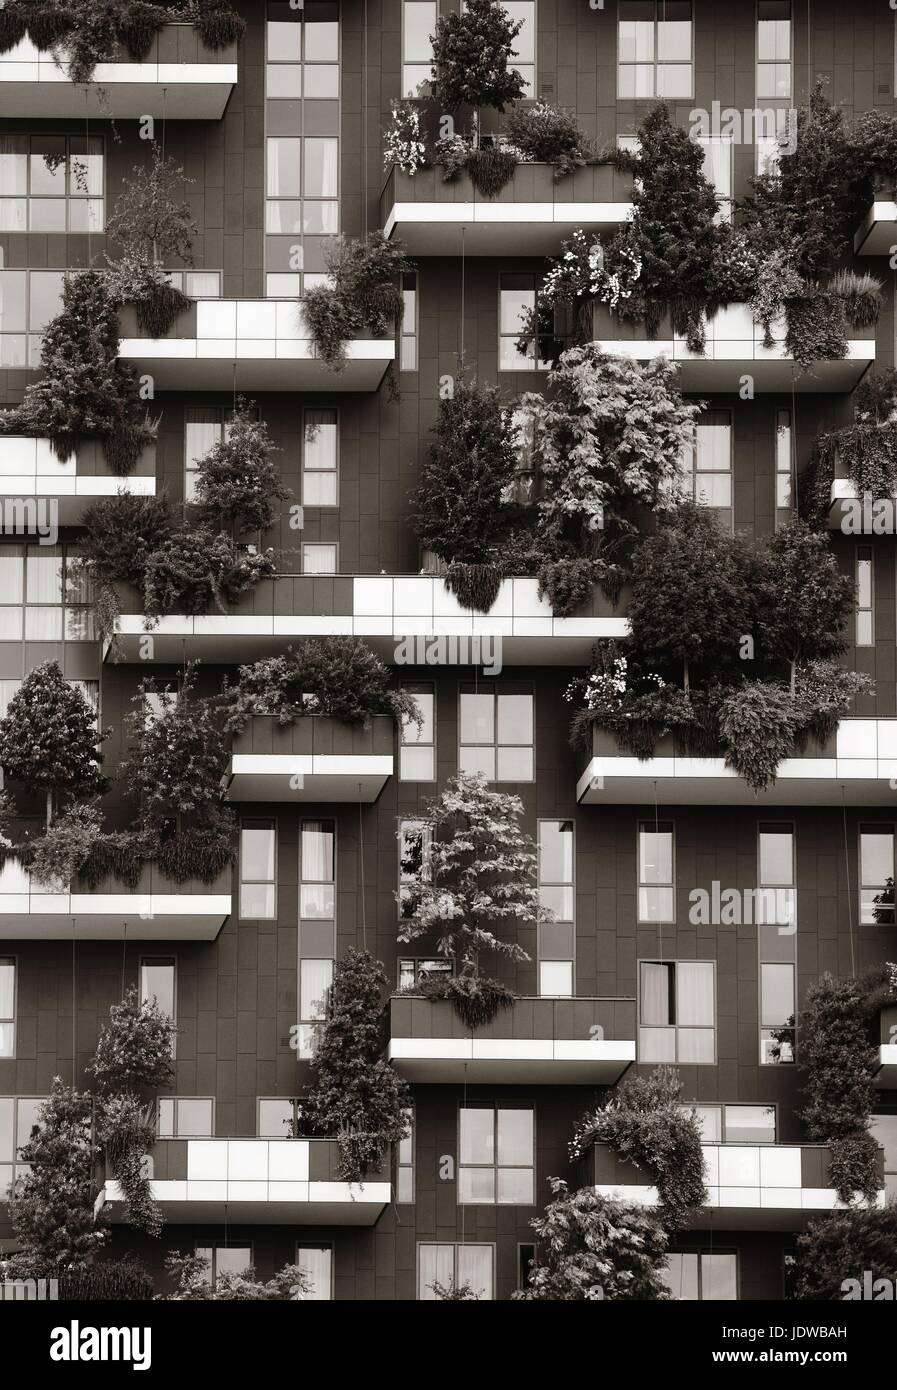 MILAN - MAY 24: Bosco Verticale closeup on May 24, 2016 in Milan, Italy. The International Highrise Award winner tween tower hosts more than 900 trees Stock Photo